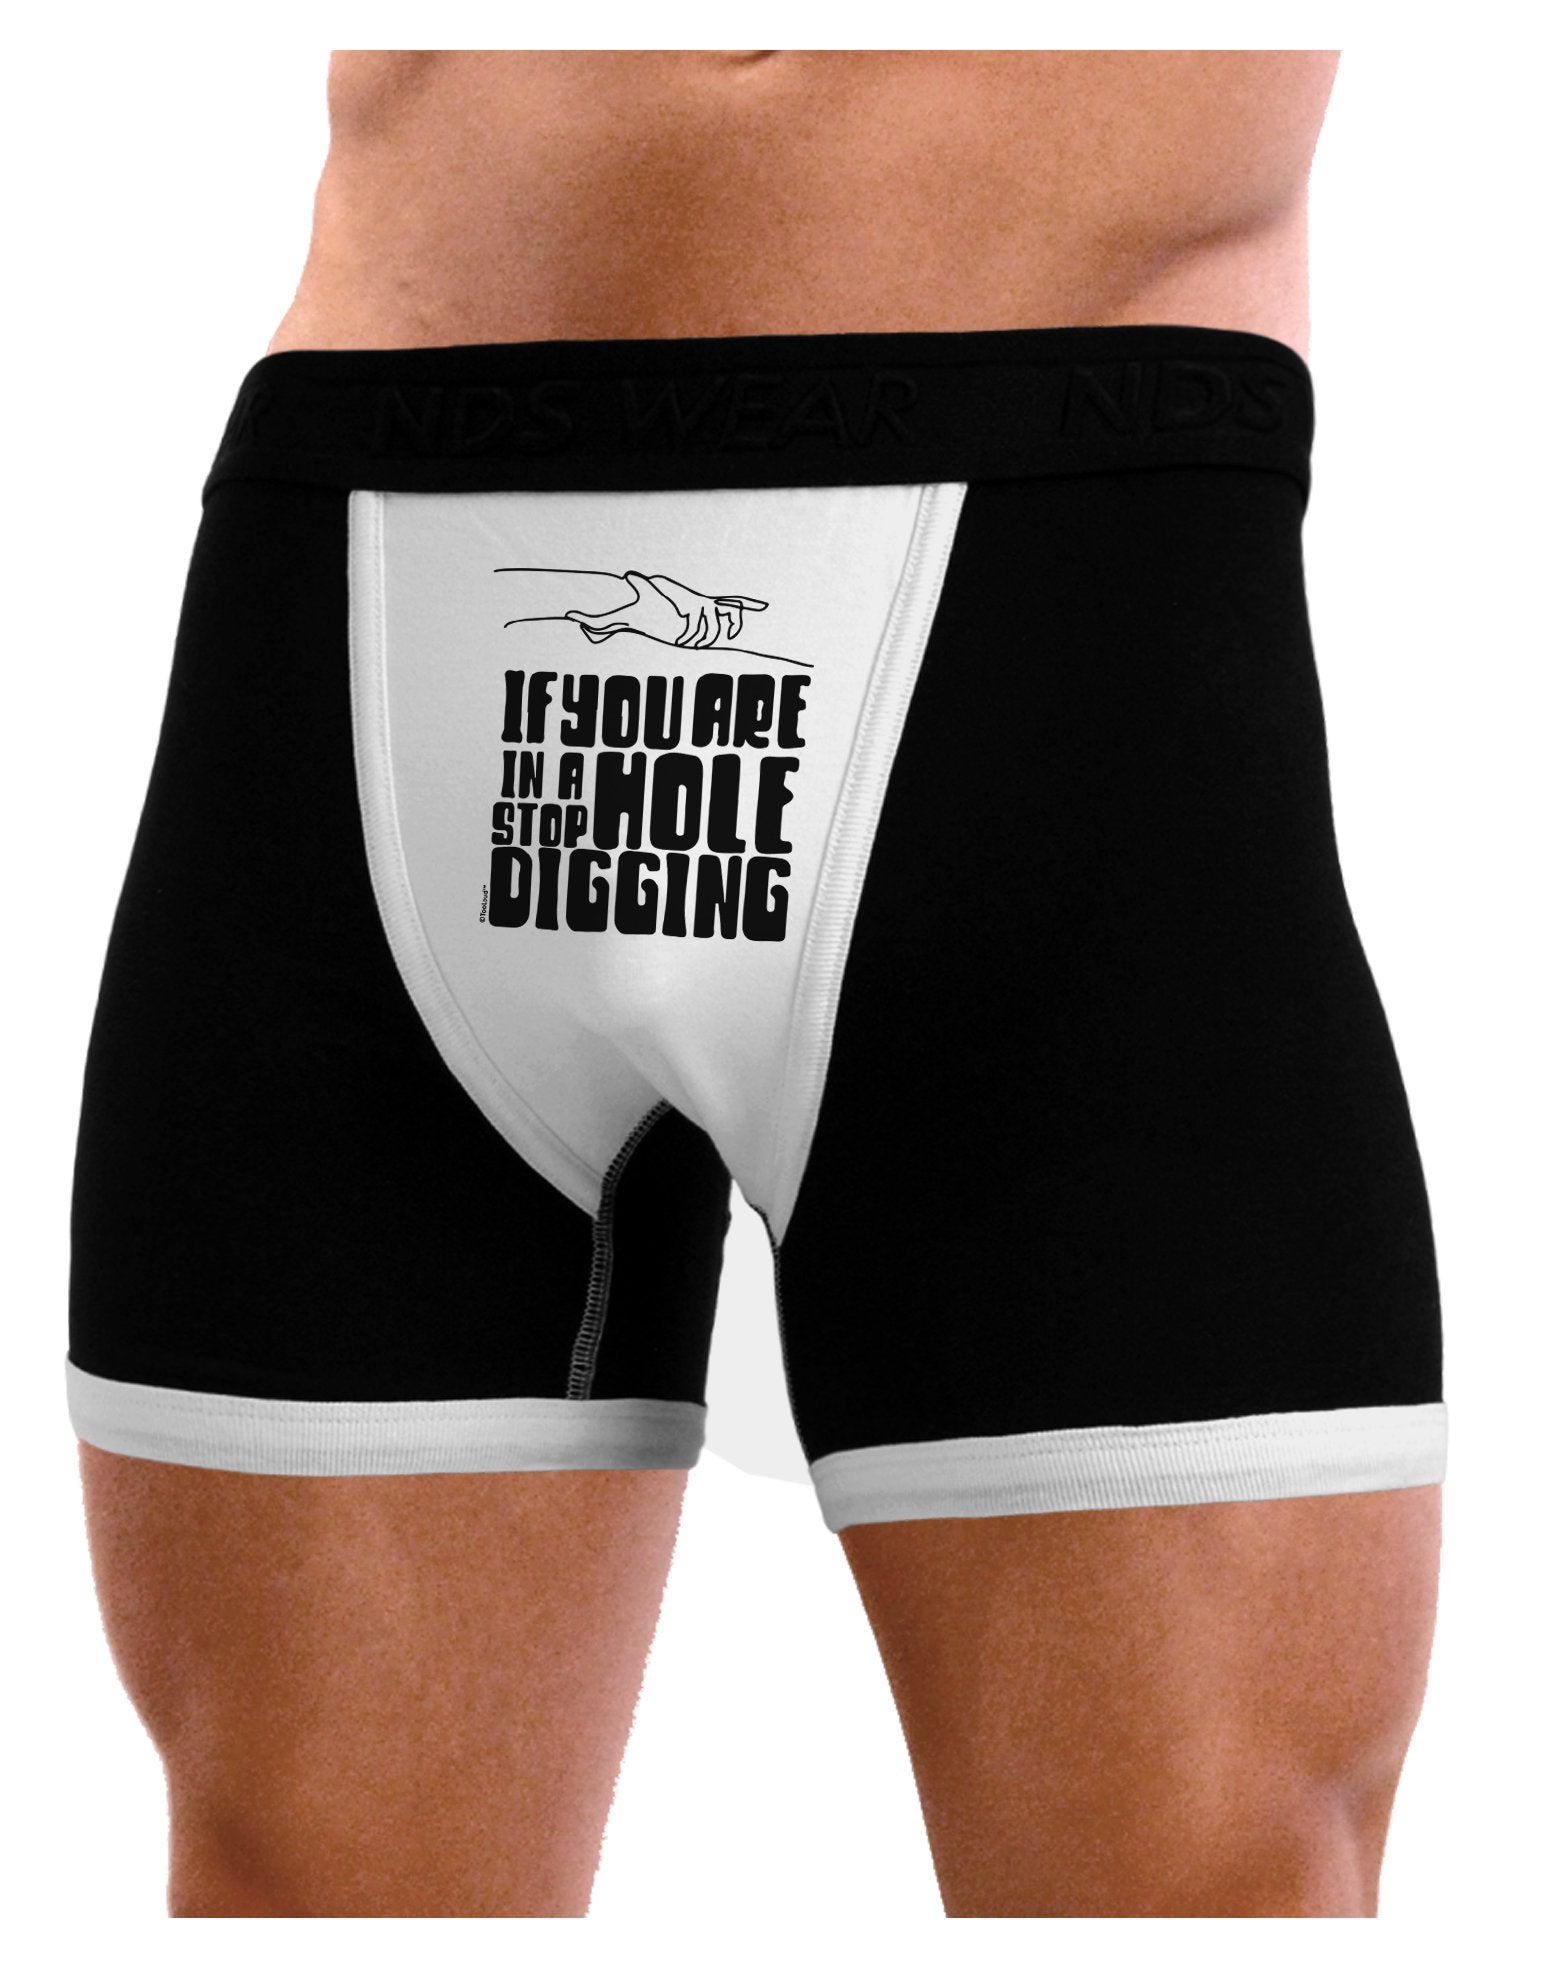 If you are in a hole stop digging Mens Boxer Brief Underwear